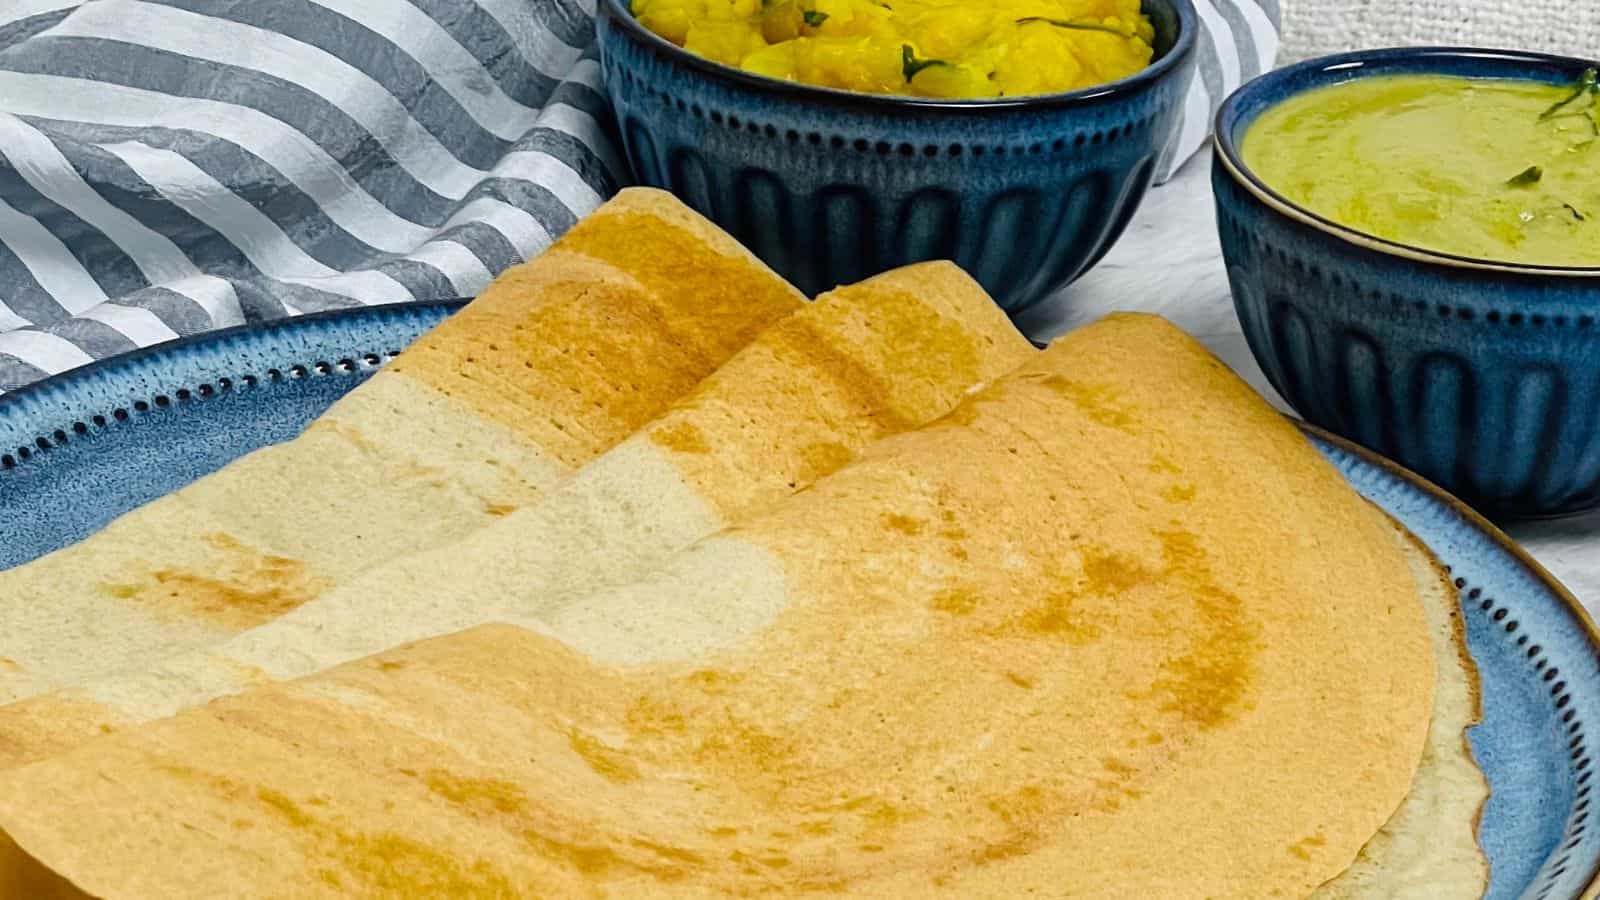 Freshly Quinoa dosa served with accompaniments in blue bowls.